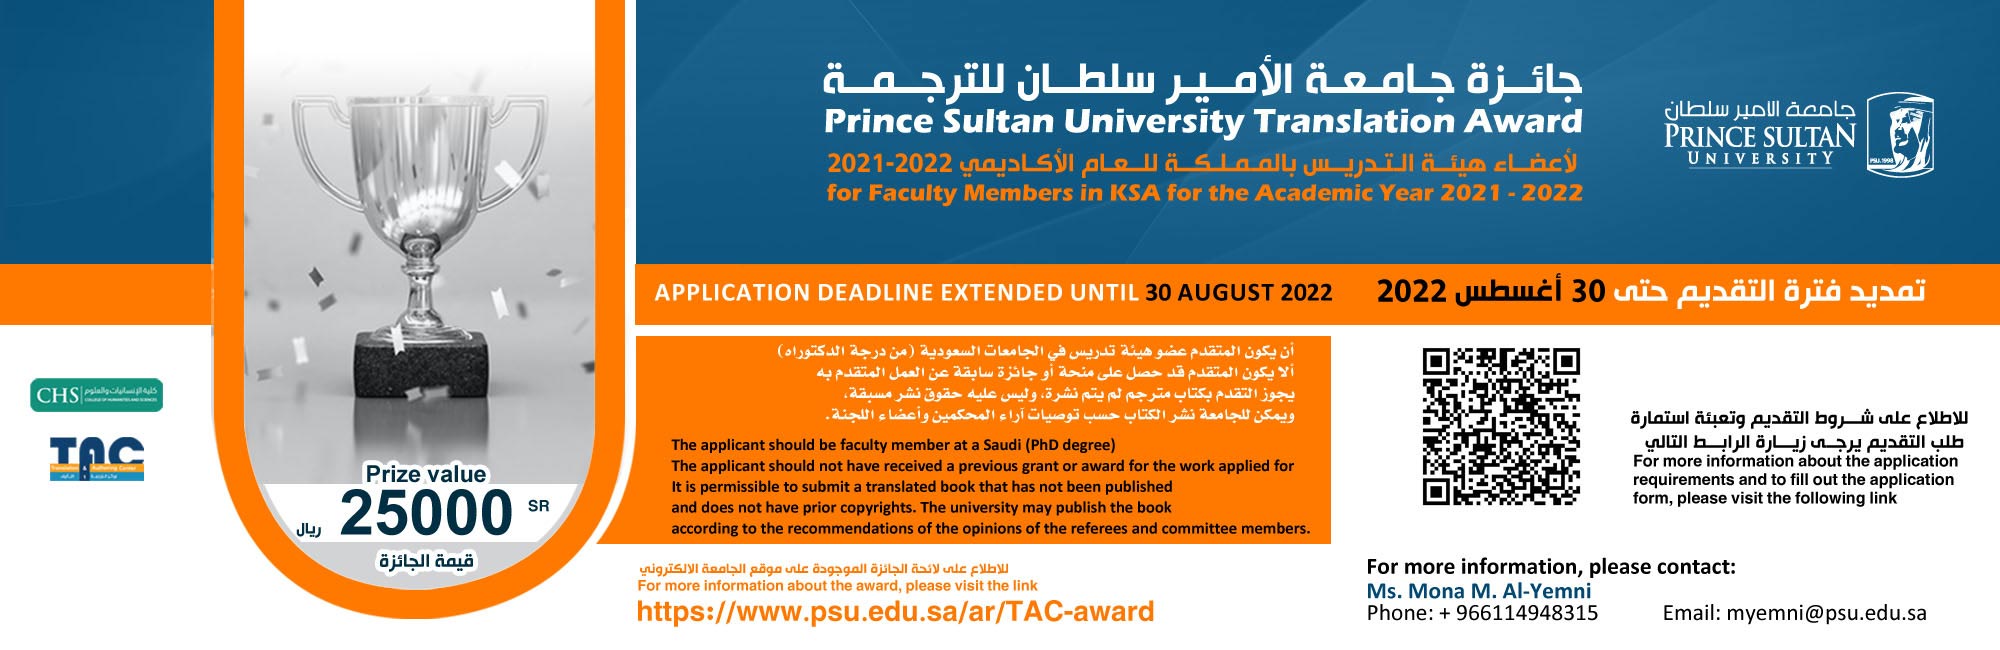 The Prince Sultan University Translation Award for Faculty - A.Y. 2021-2022